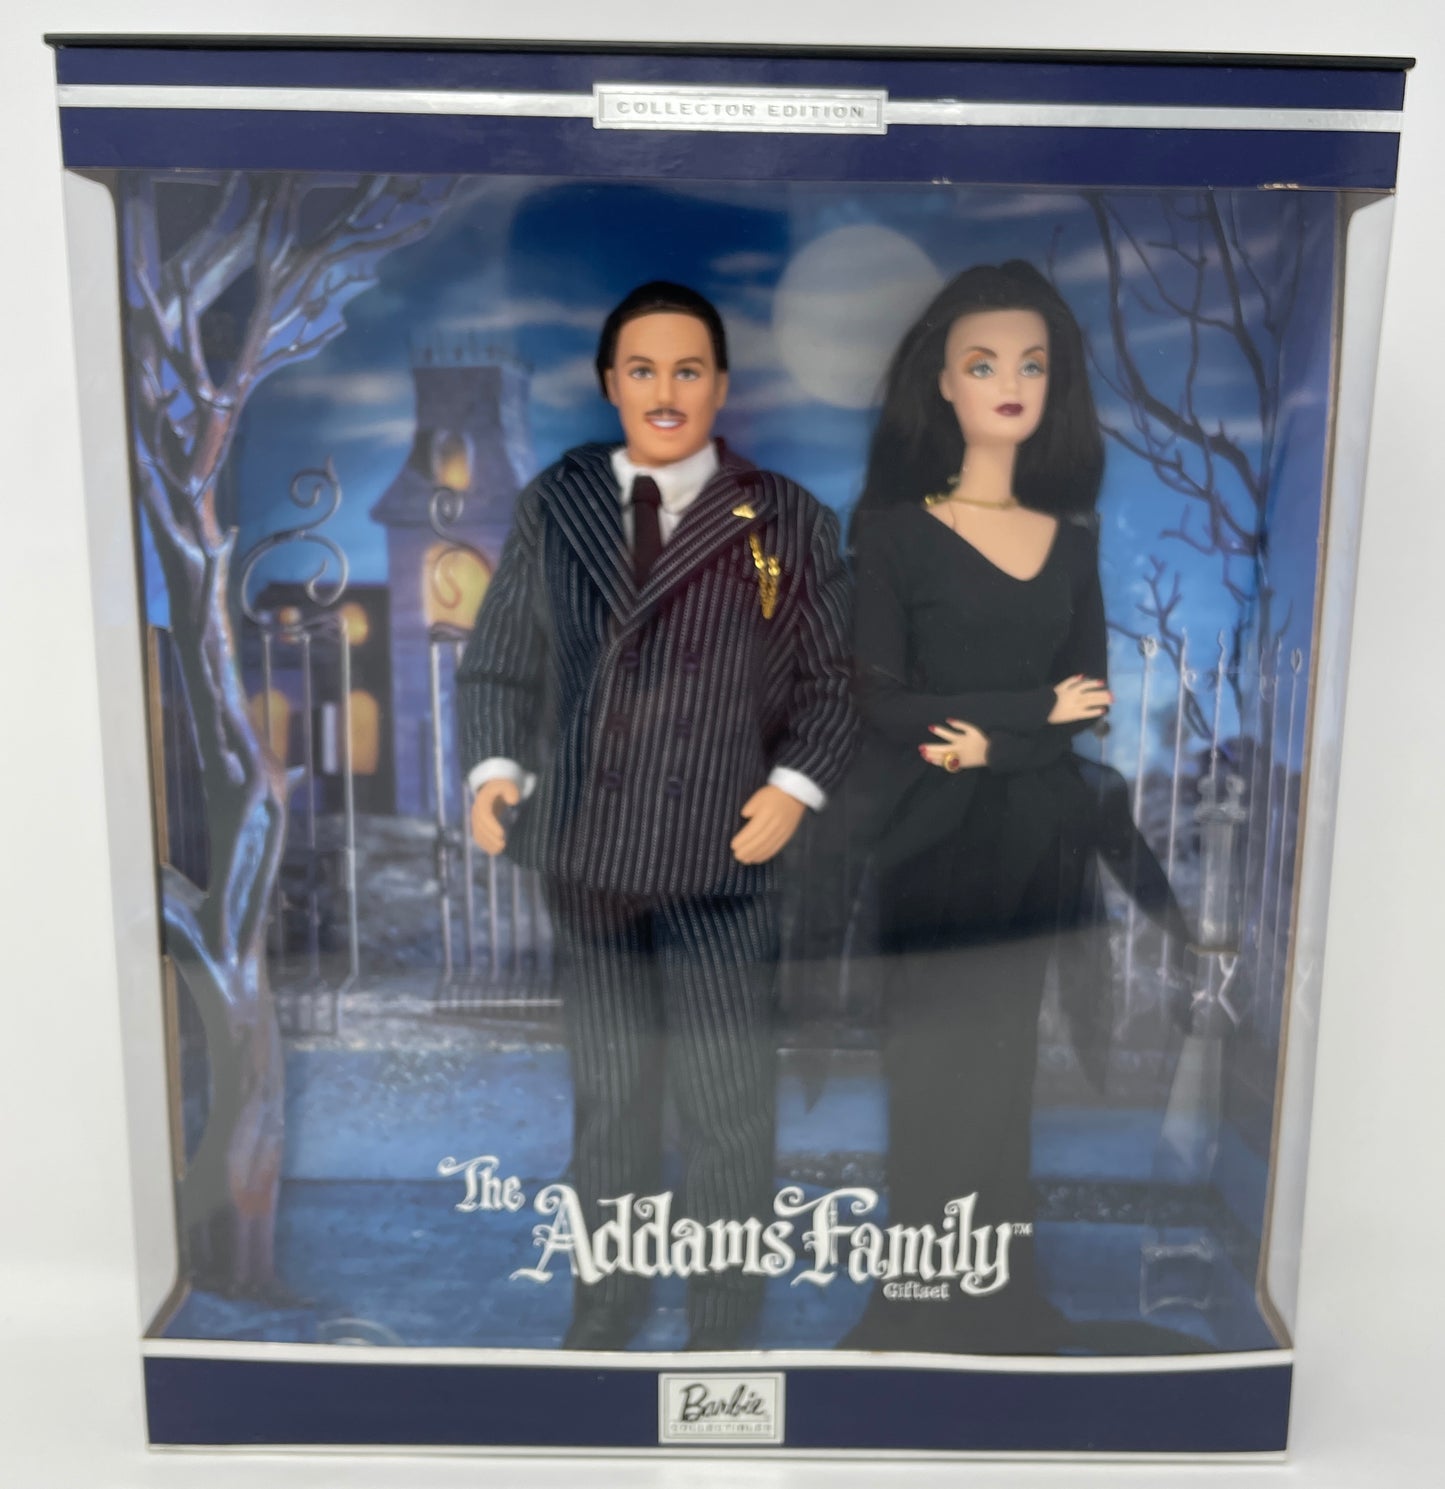 BARBIE AND KEN DOLLS - THE ADDAMS FAMILY GIFTSET - #27276 - MATTEL 2000